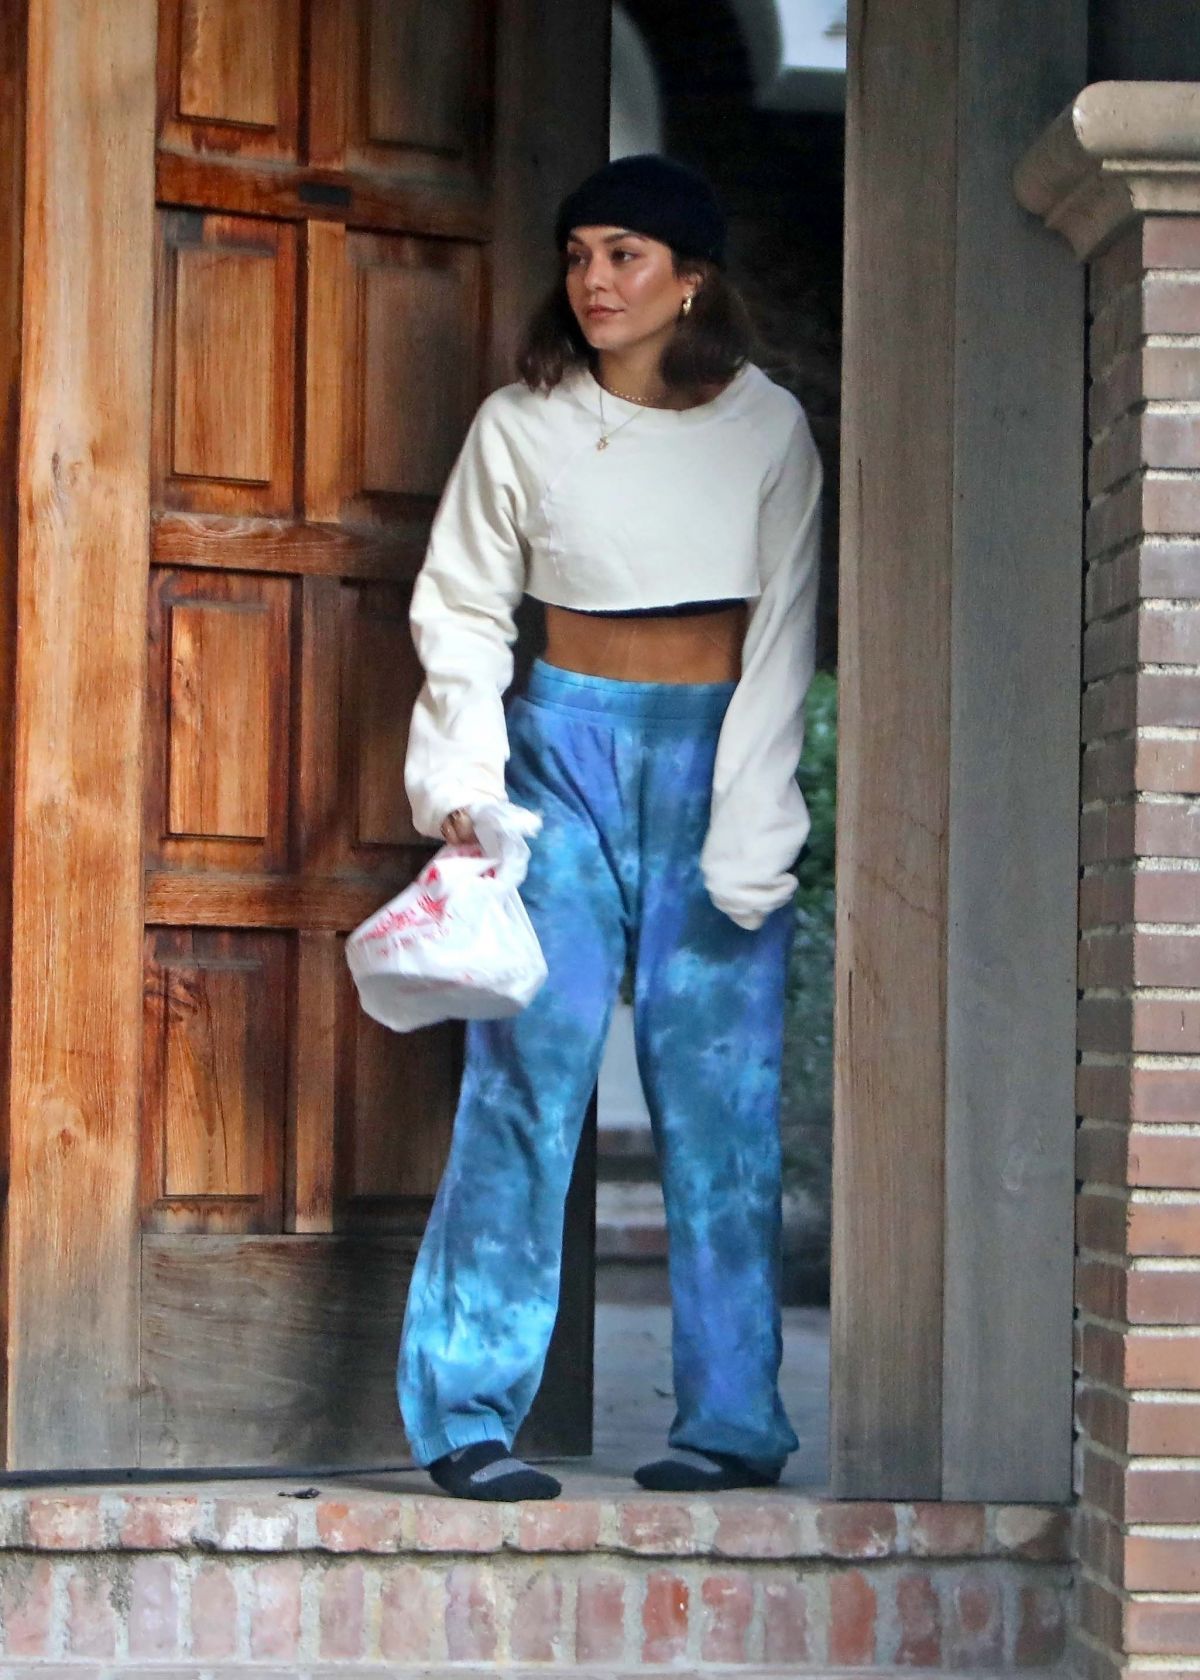 vanessa-hudgens-picking-up-food-delivery-at-her-home-in-los-angeles-11-18-2020-9.jpg